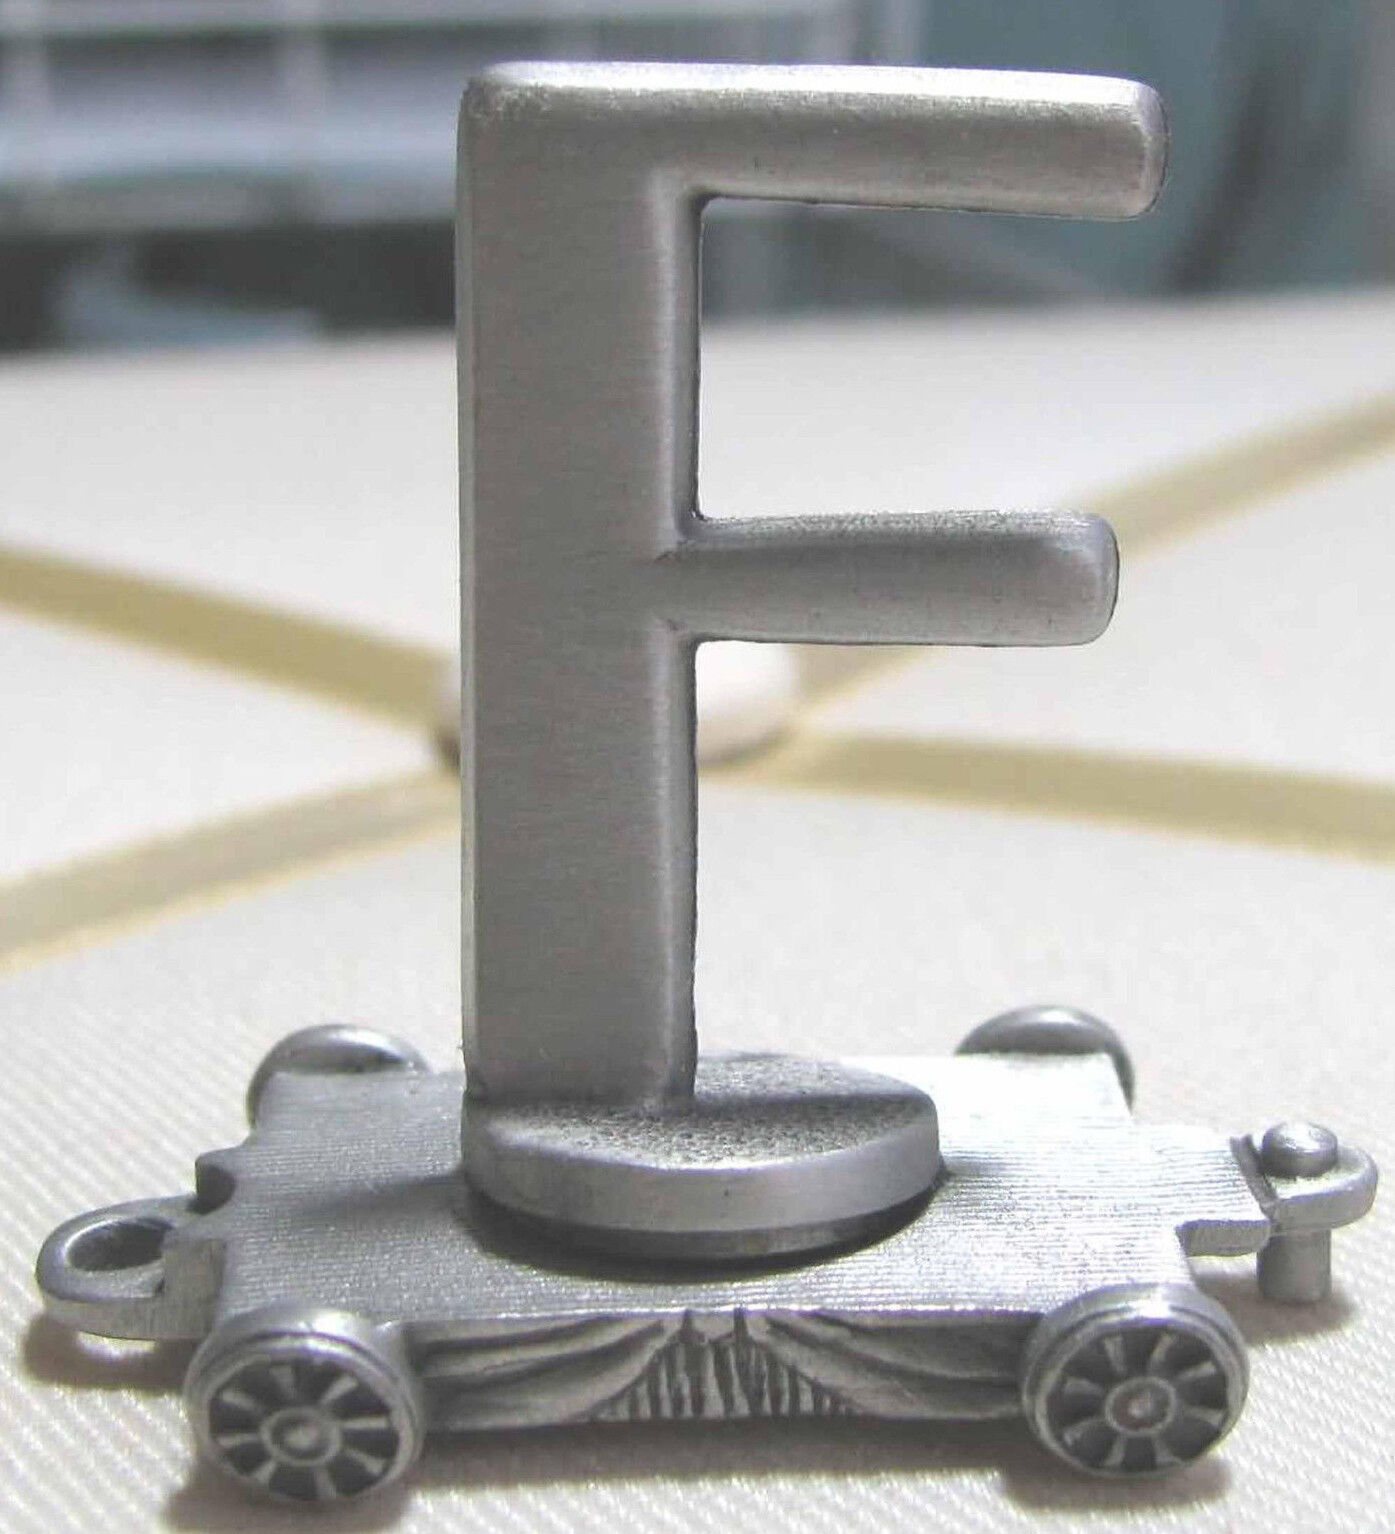 LETTER F FORT PEWTER - LASTING EXPRESSIONS PEWTER TRAIN CAR Vintage Miniature. 